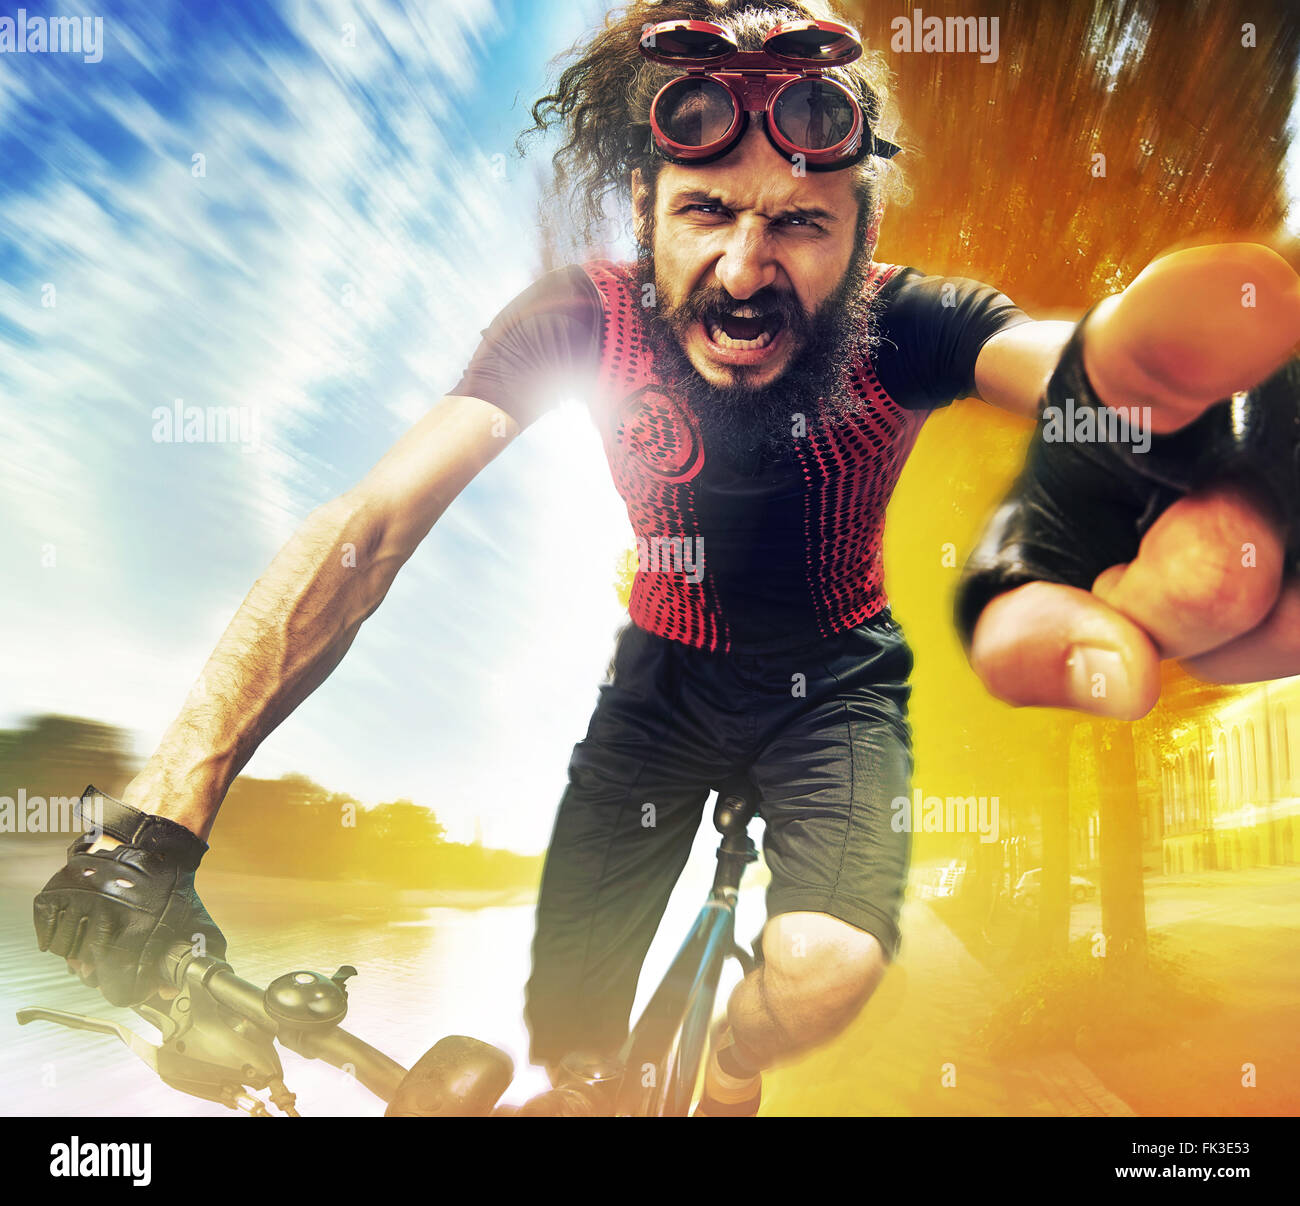 Funny image of a shouting bicyclist Stock Photo